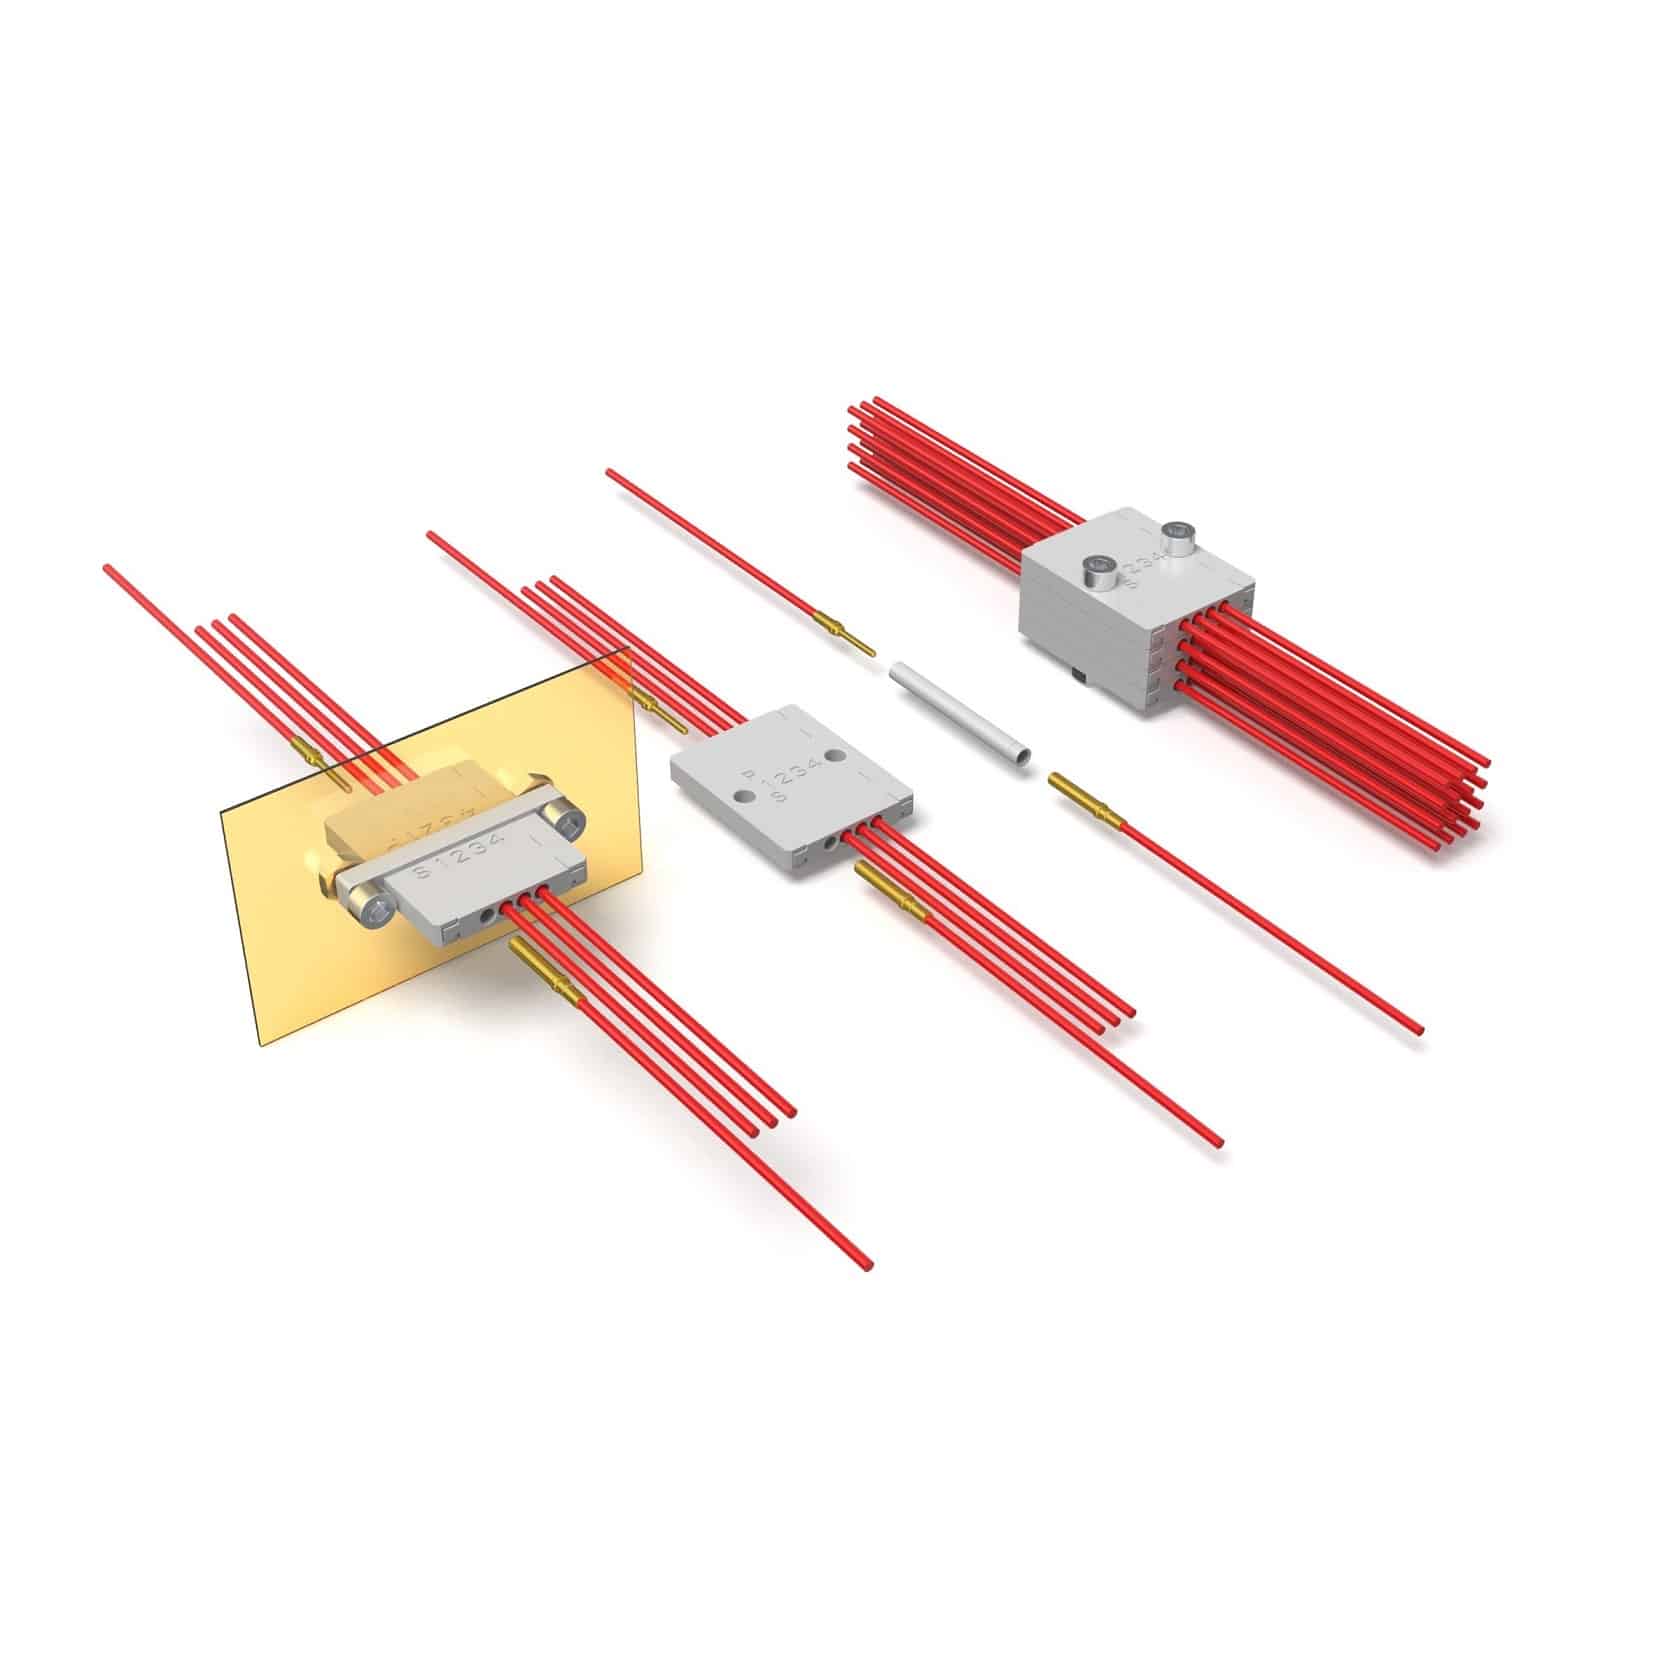 Wire Connectors That Can Replace Manual Splicing Processes